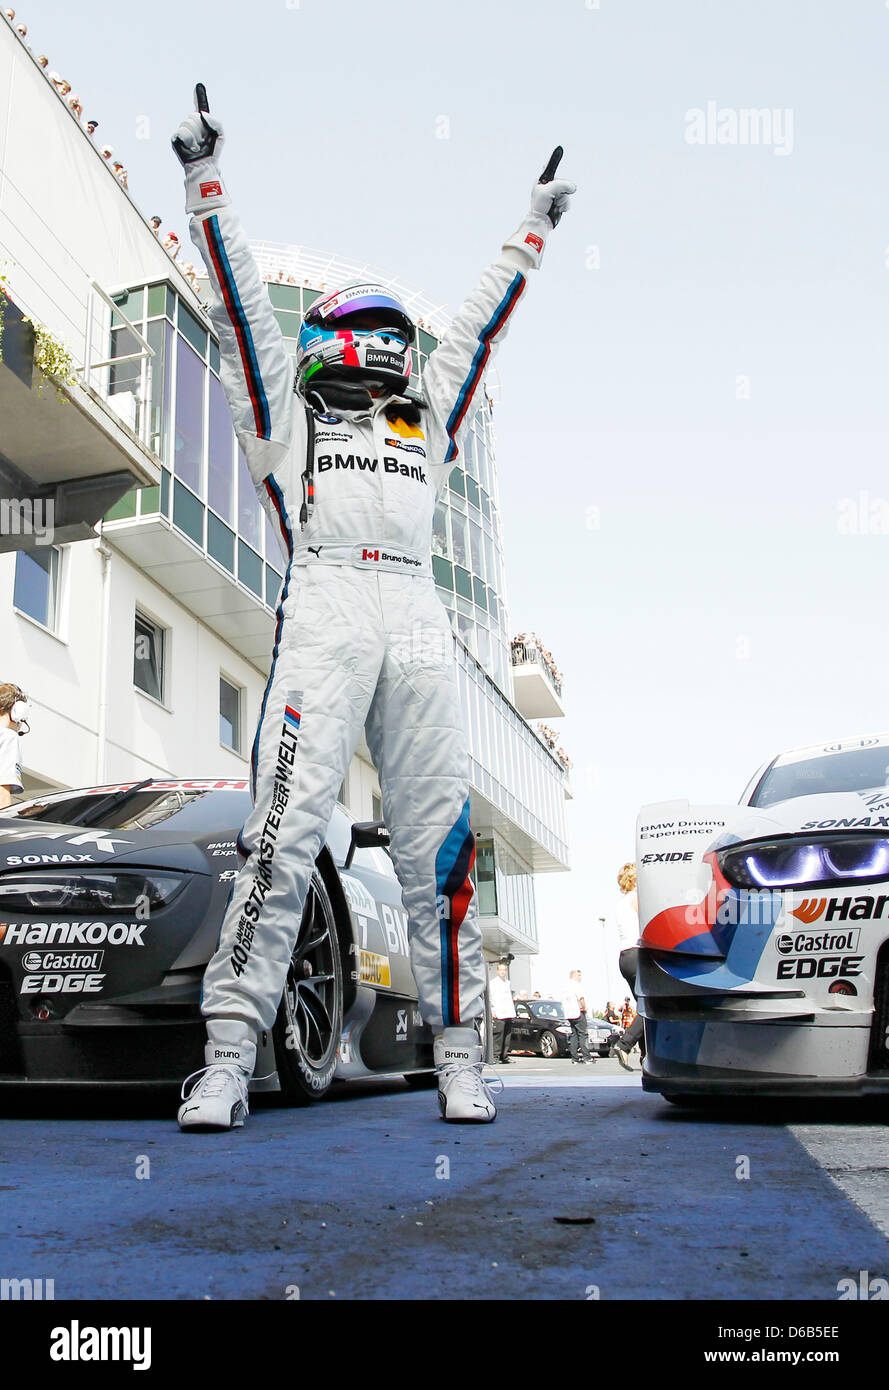 Canadian racing driver Bruno Spengler of BMW celebrates his victory of the 6th race of the German Touring Car Masters (DTM) in the parc fermee at the Nuerburgring, Gerrmany, 19 August 2012. Photo: JUERGEN TAP Stock Photo